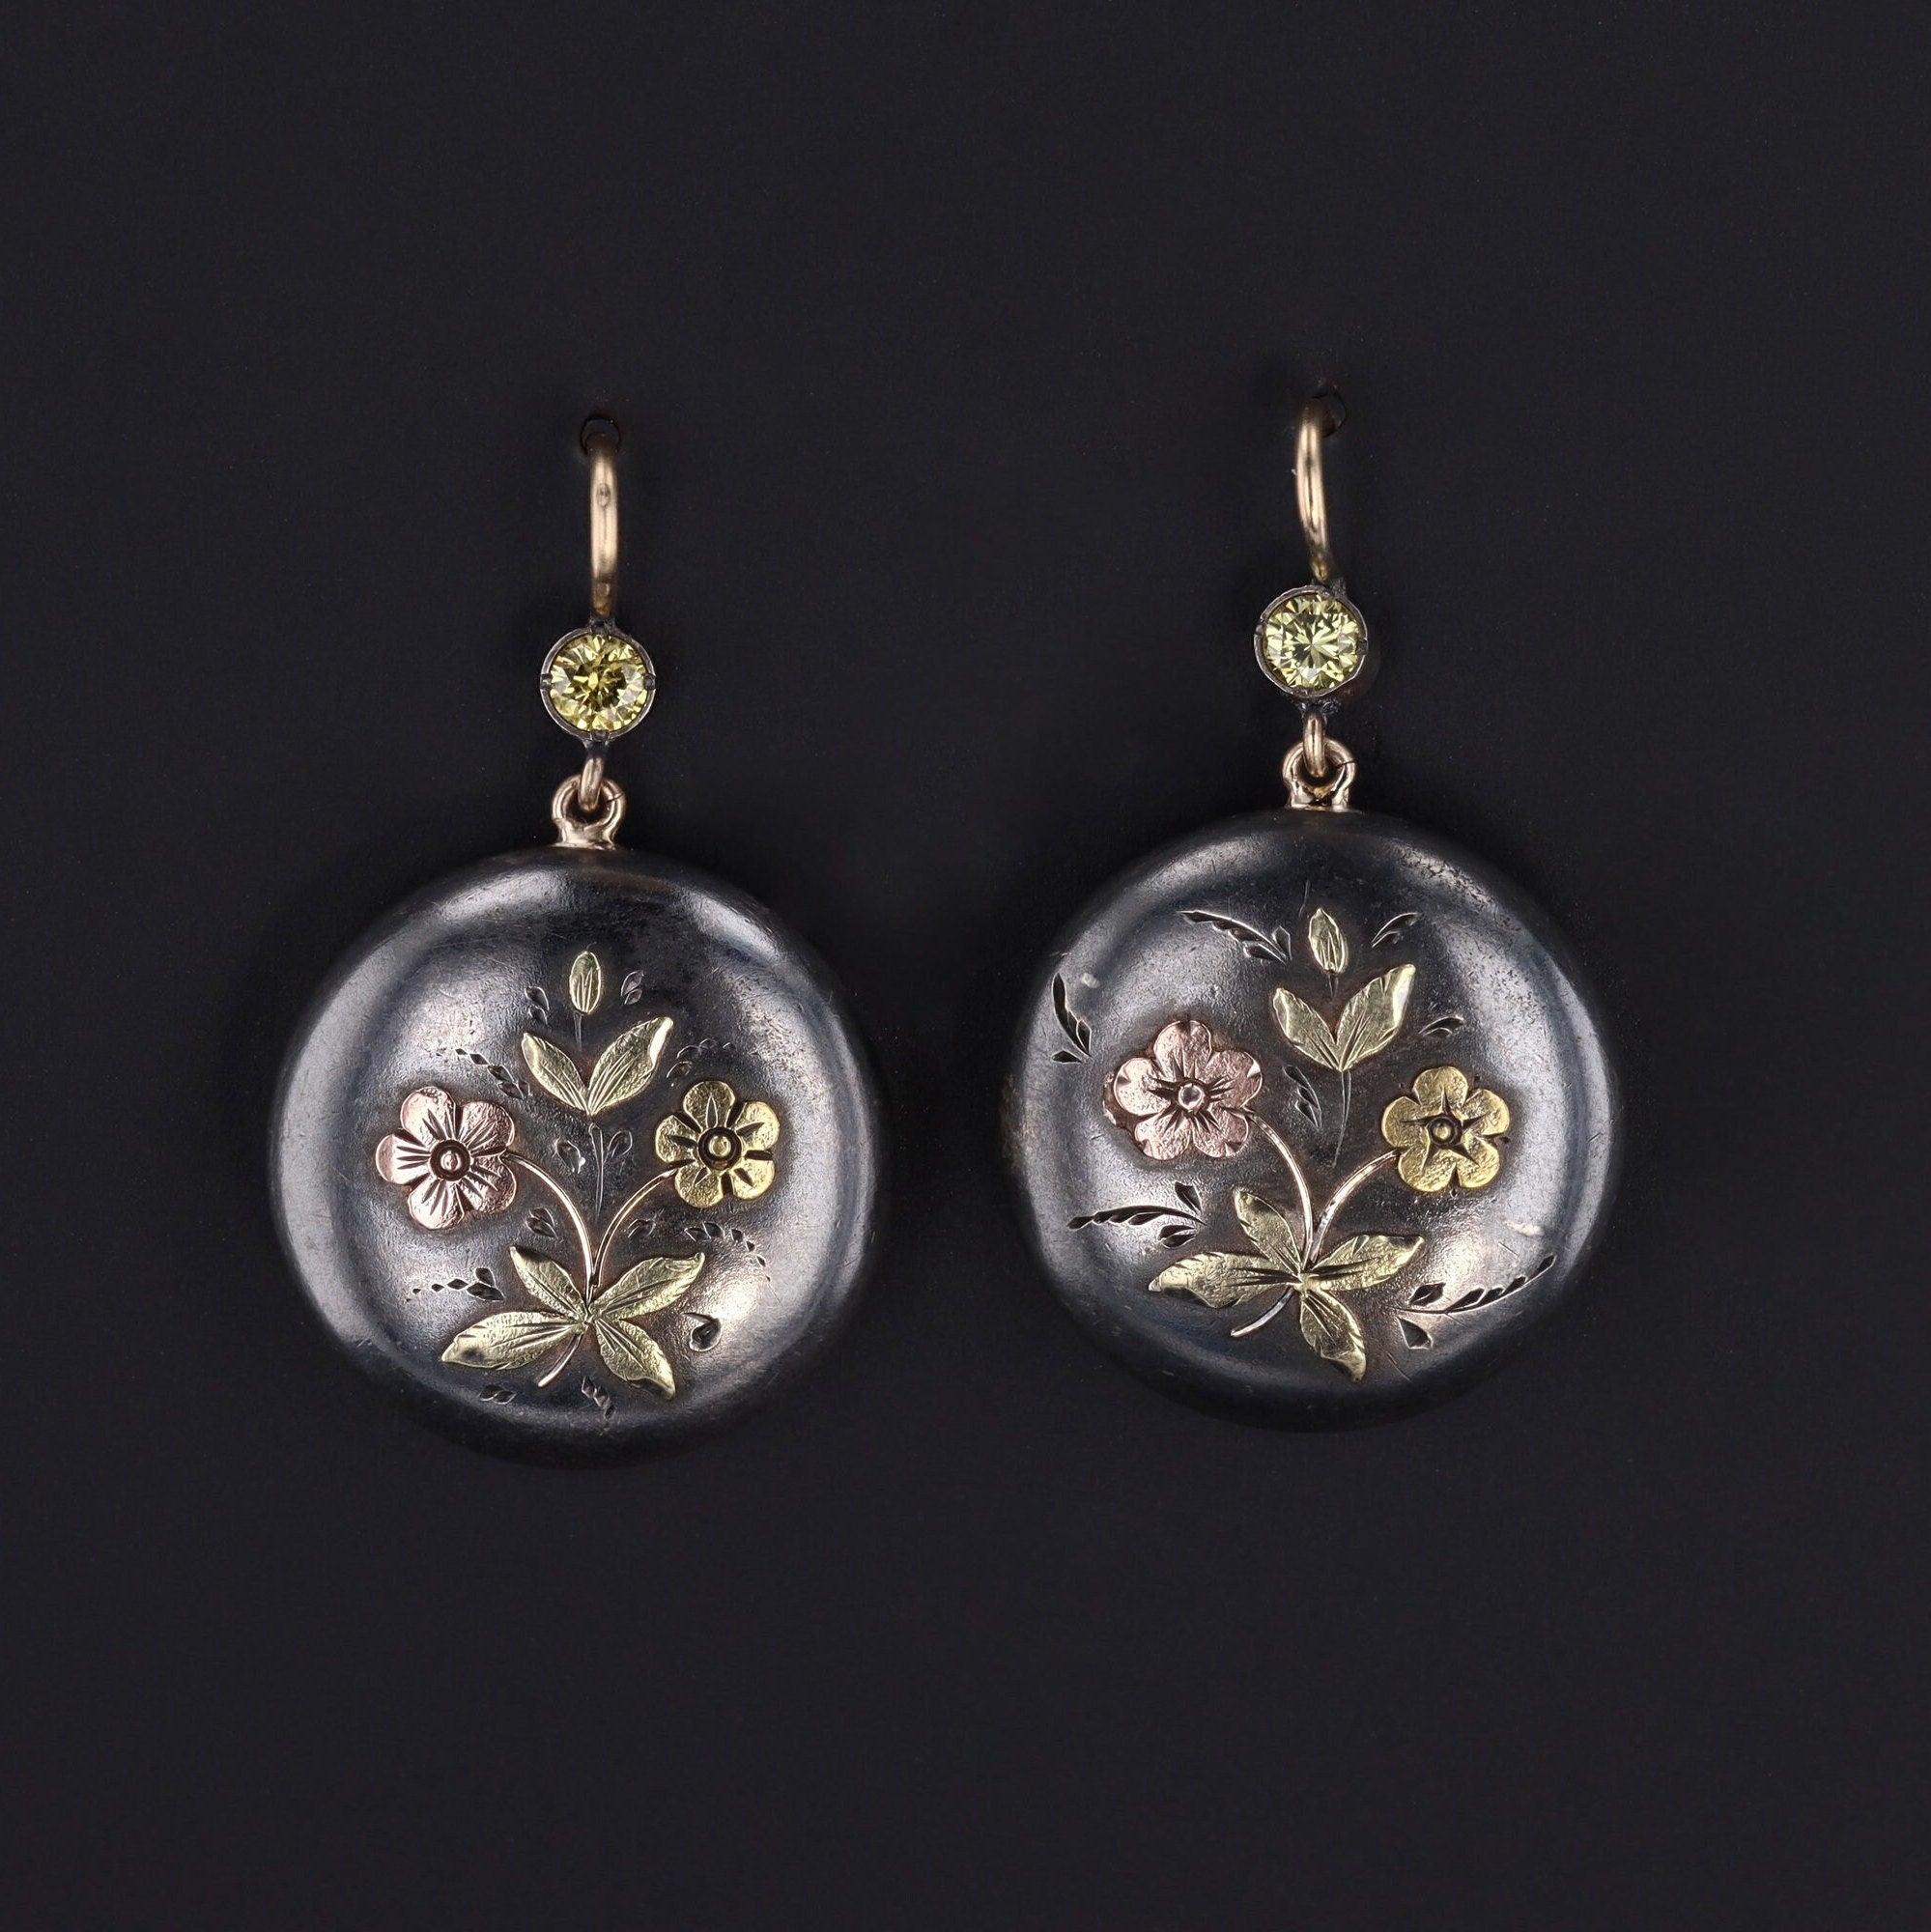 Antique Shakudo Earrings with Diamonds and 14k Ear Wires